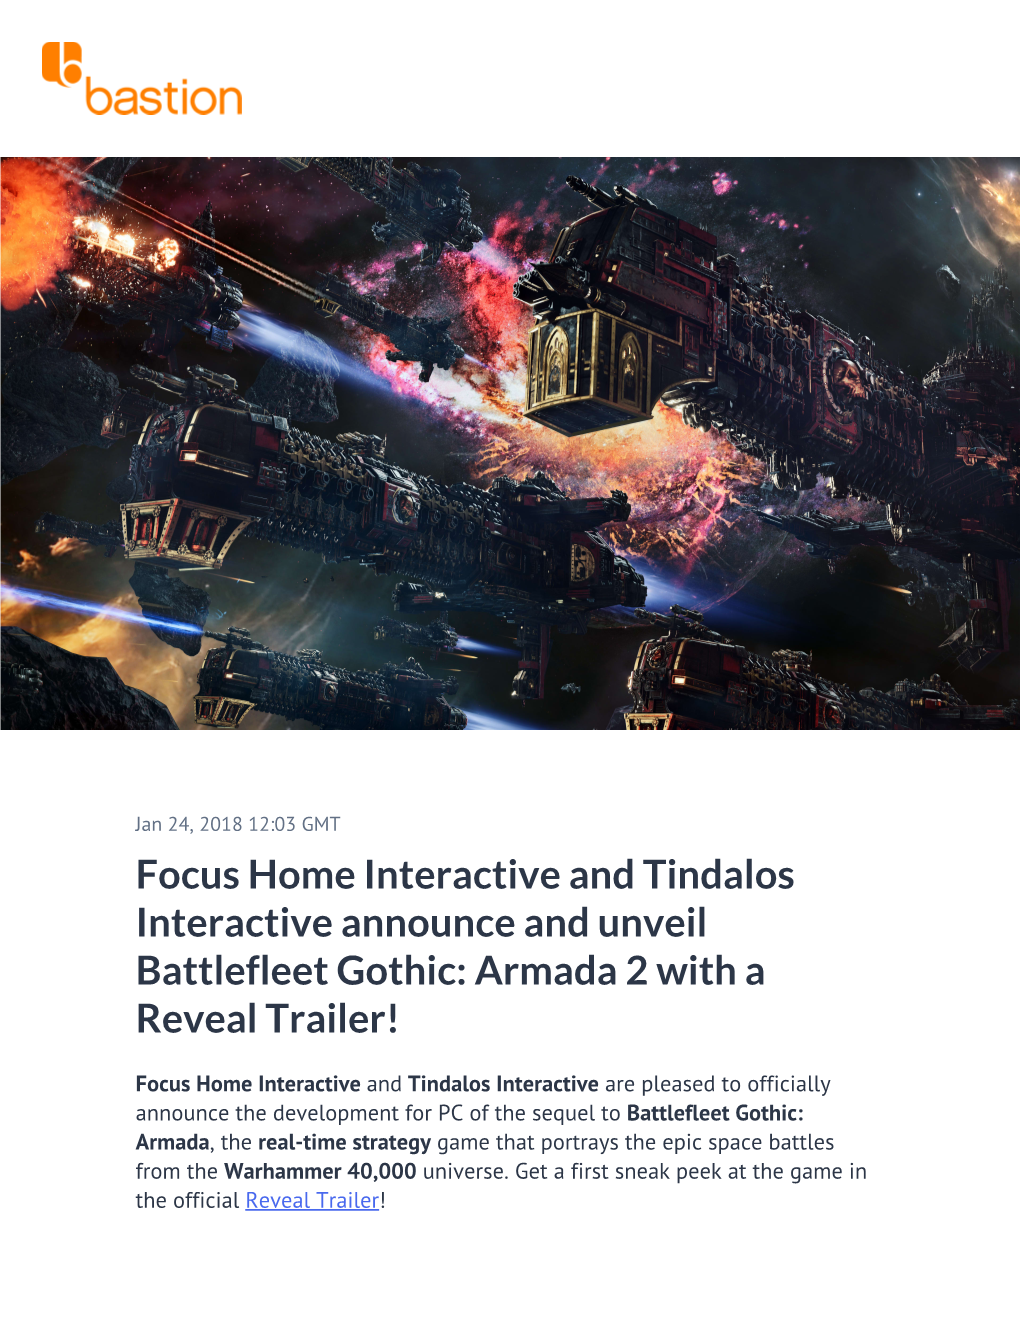 Focus Home Interactive and Tindalos Interactive Announce and Unveil Battlefleet Gothic: Armada 2 with a Reveal Trailer!